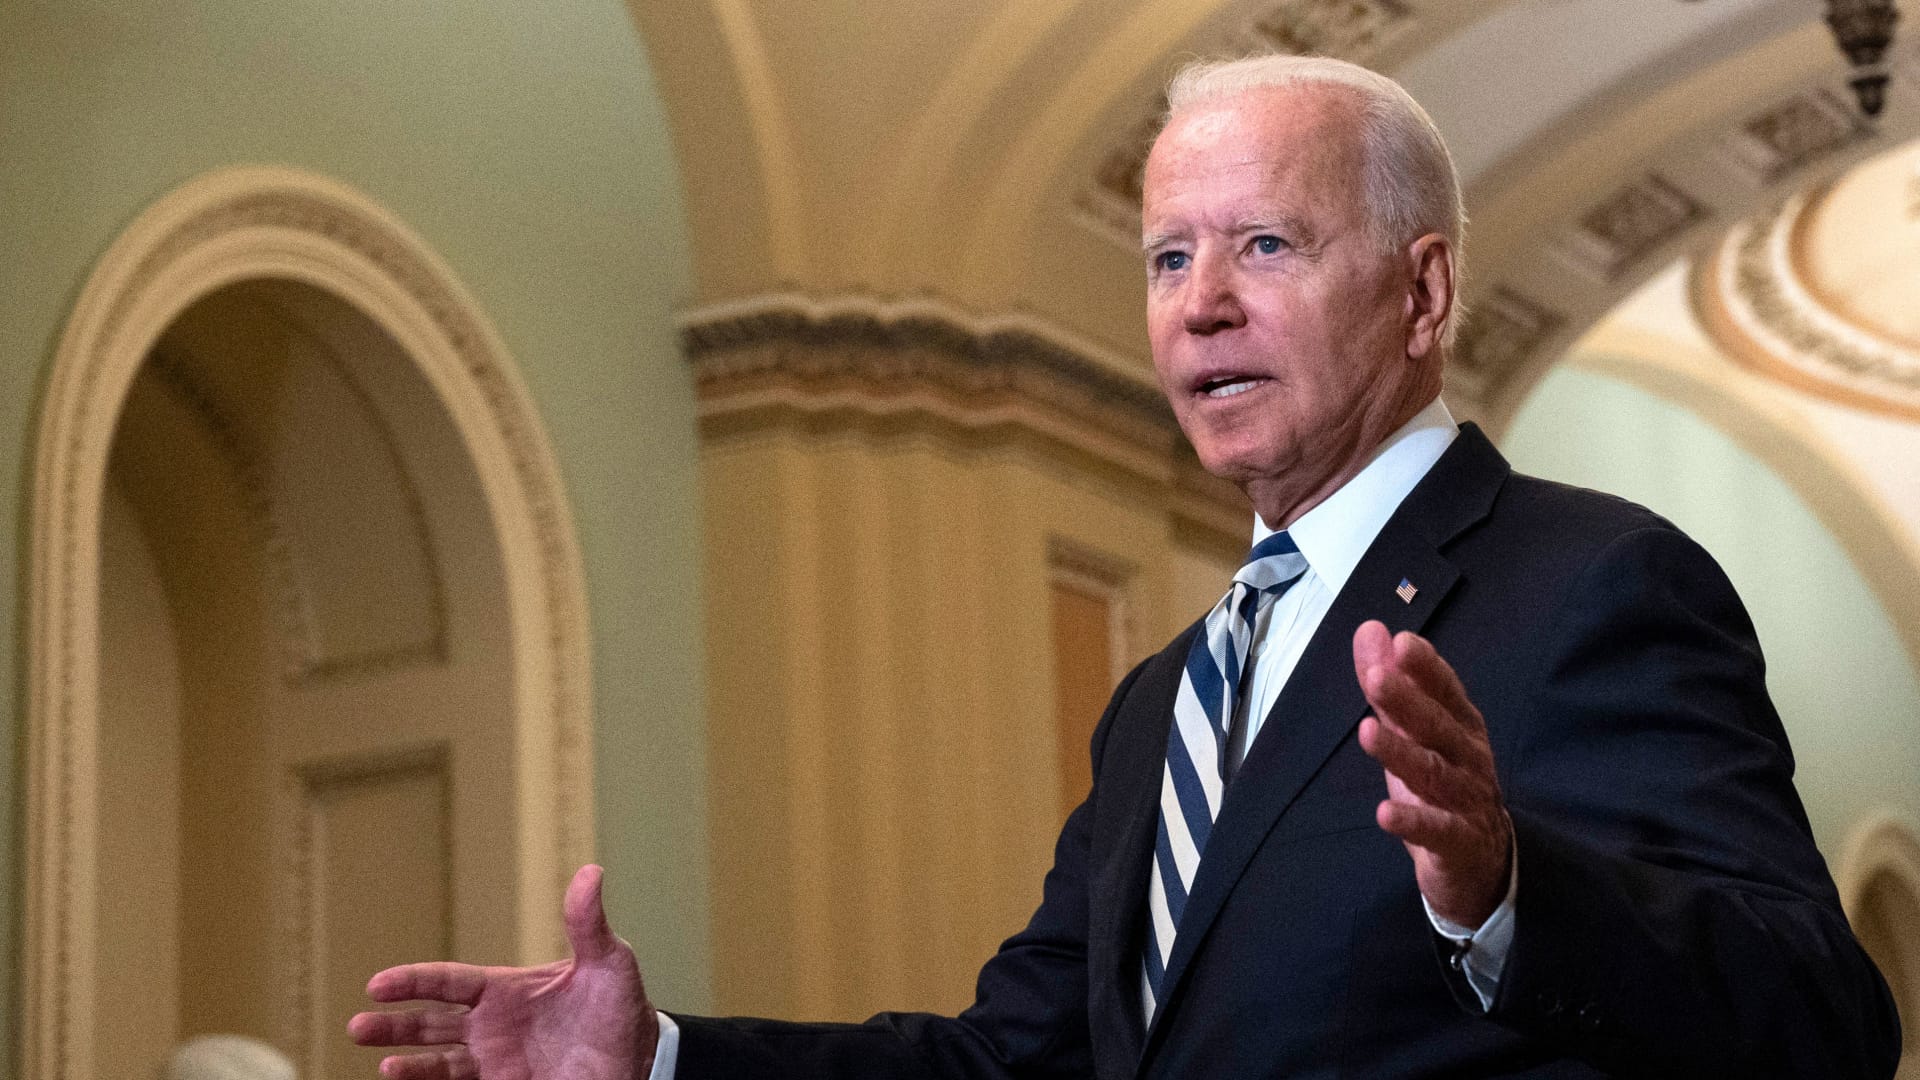 US President Joe Biden speaks to the press after meeting with the Senate Democratic caucus to build support for his infrastructure and economic investment goals during the Democratic luncheon at the US Capitol on July 13, 2021 in Washington, DC, July 14, 2021.